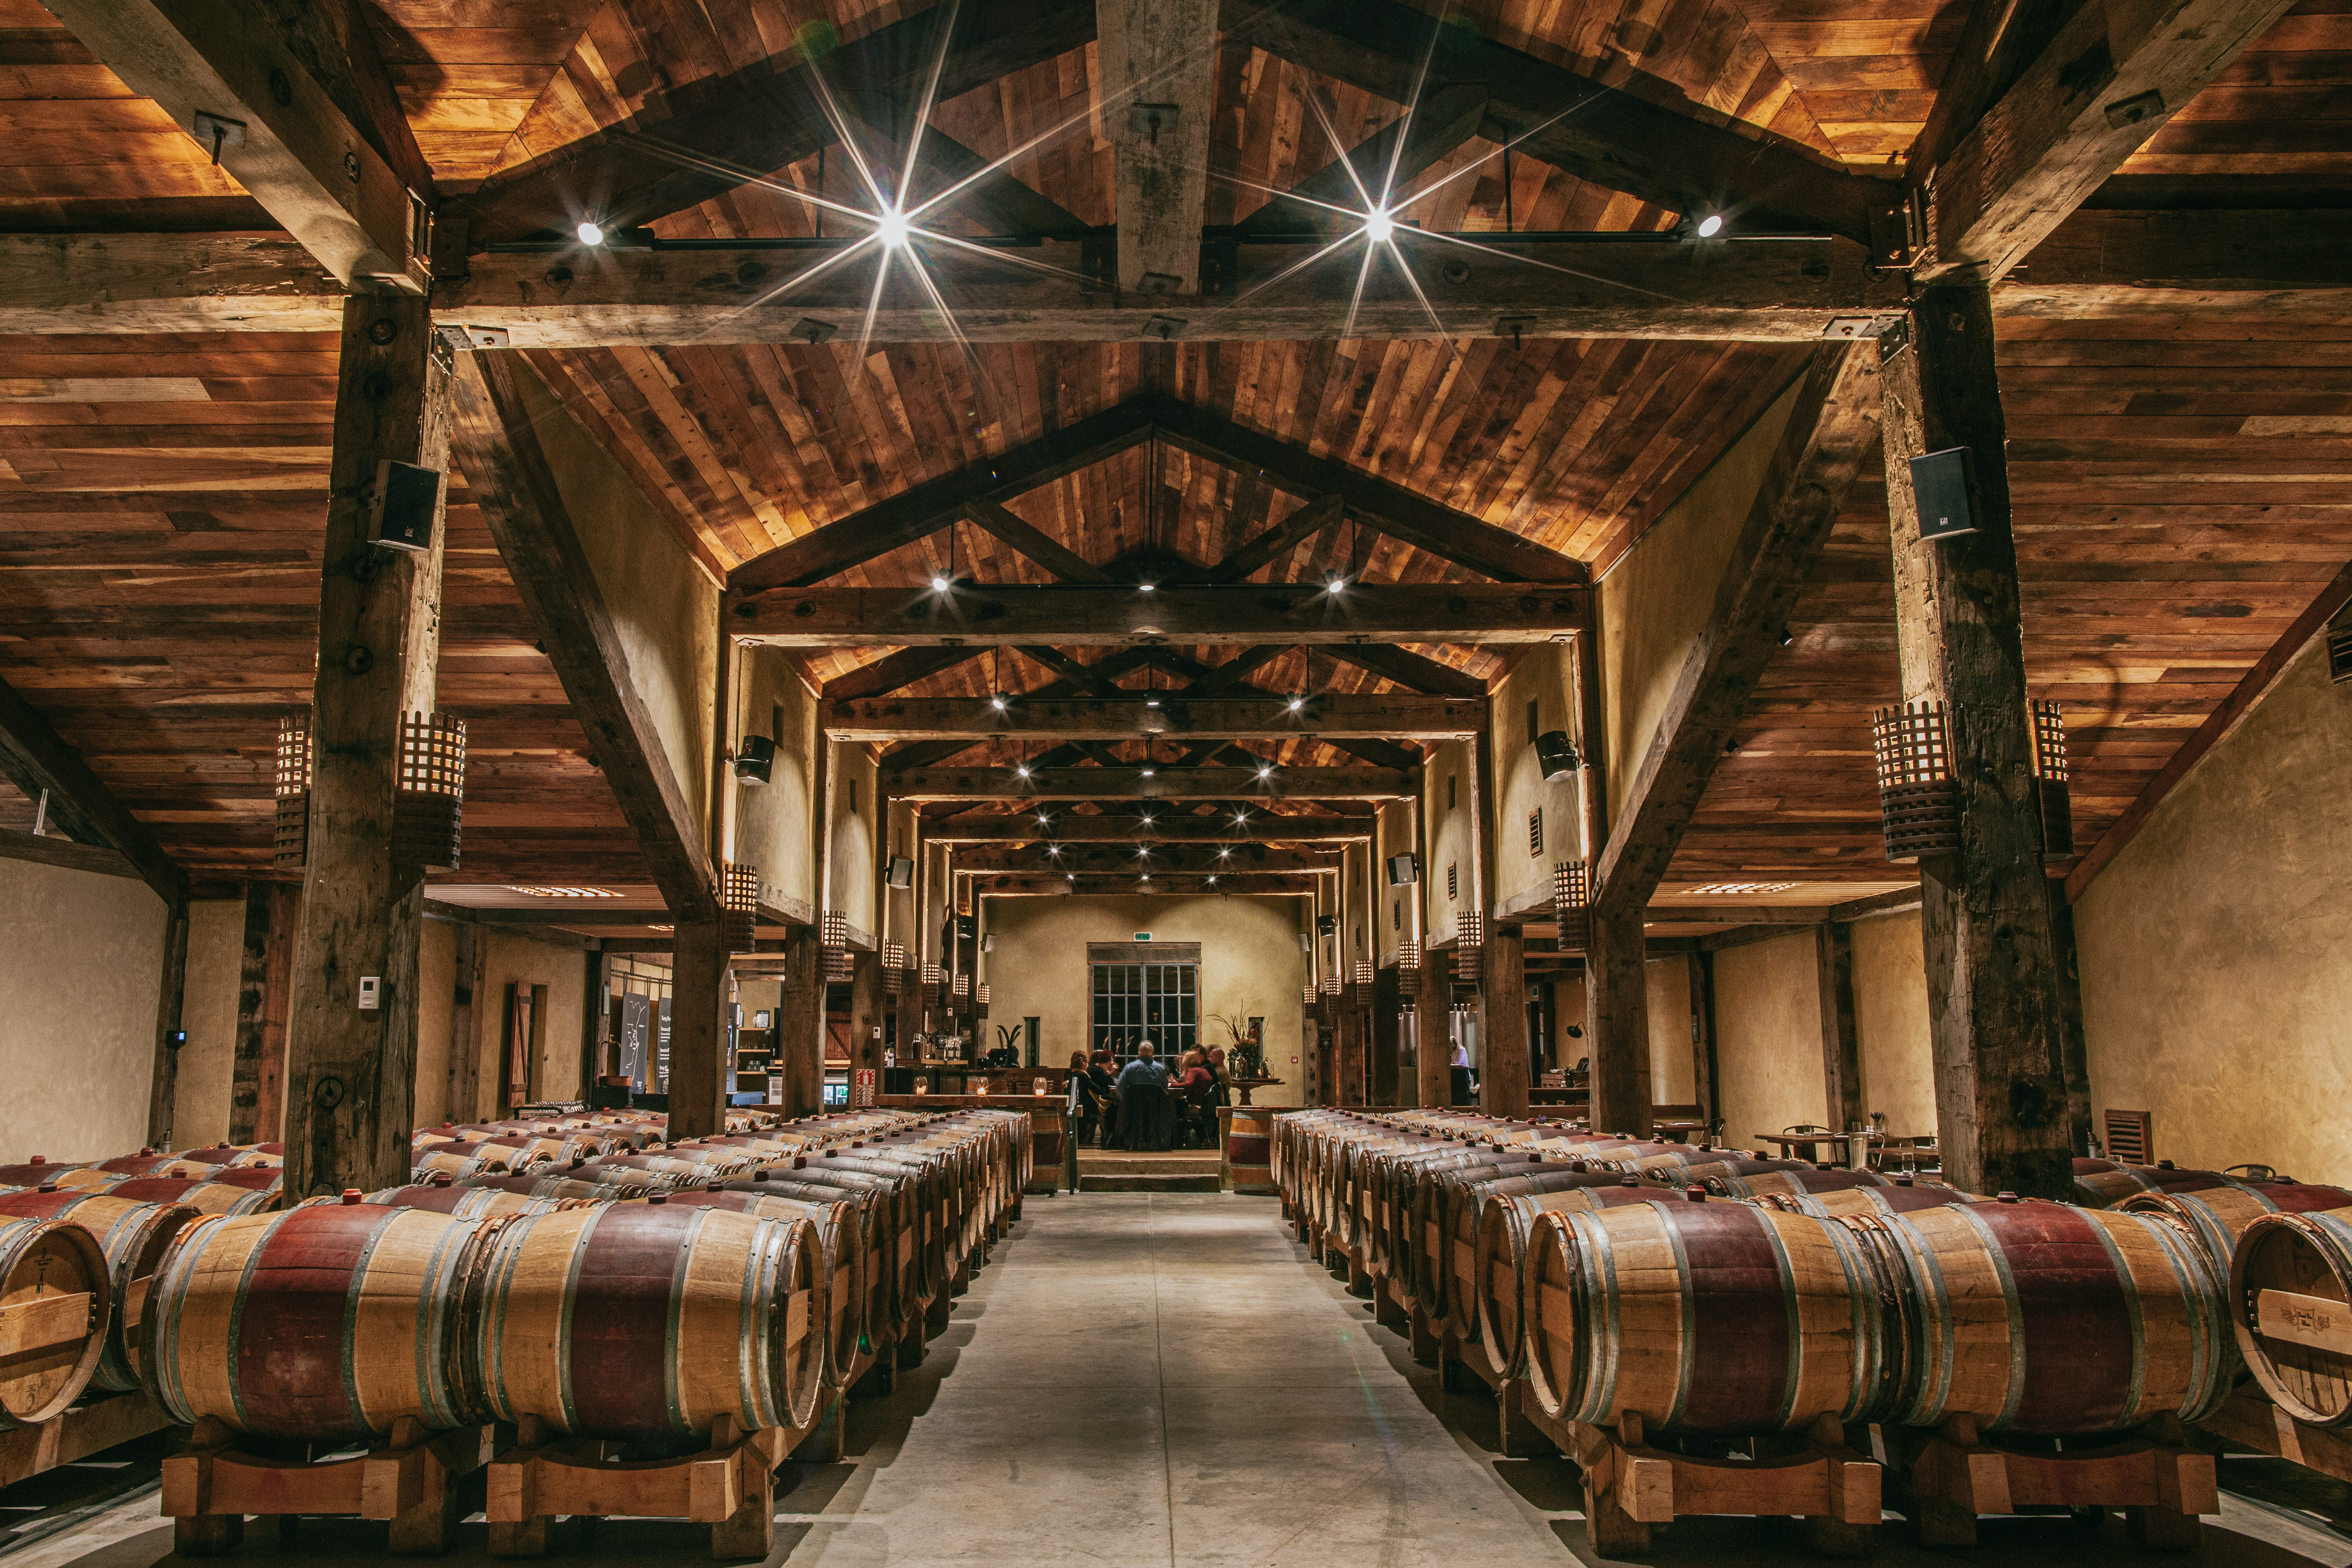 Winery filled with barrels of wine